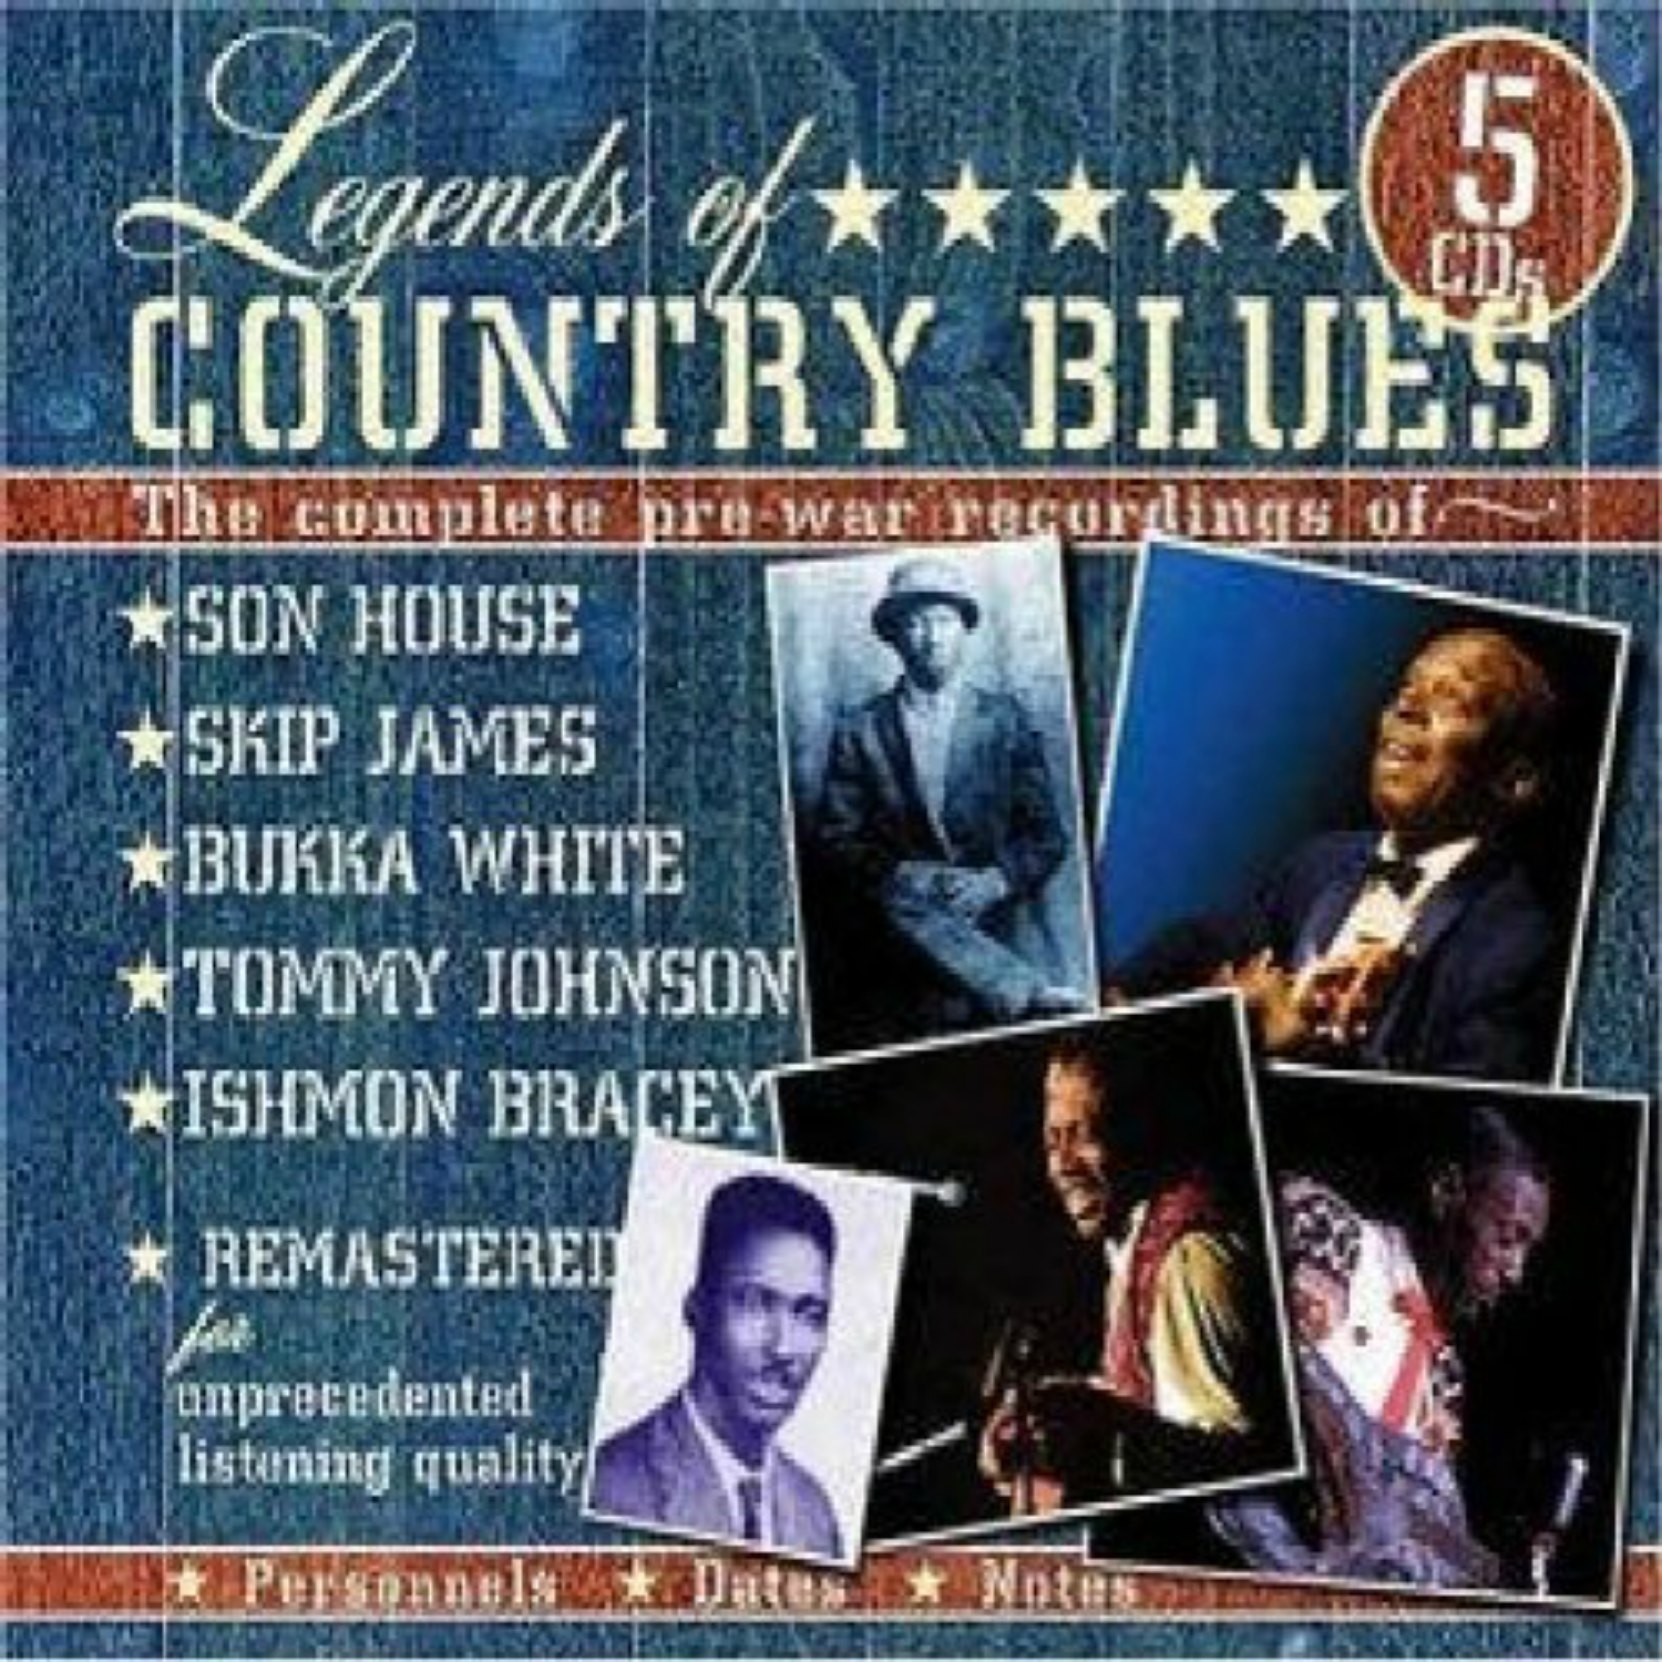 CD cover, Legends of Country Blues, on JSP Records, features the complete early recordings of Son House, Skip James, Bukka White,